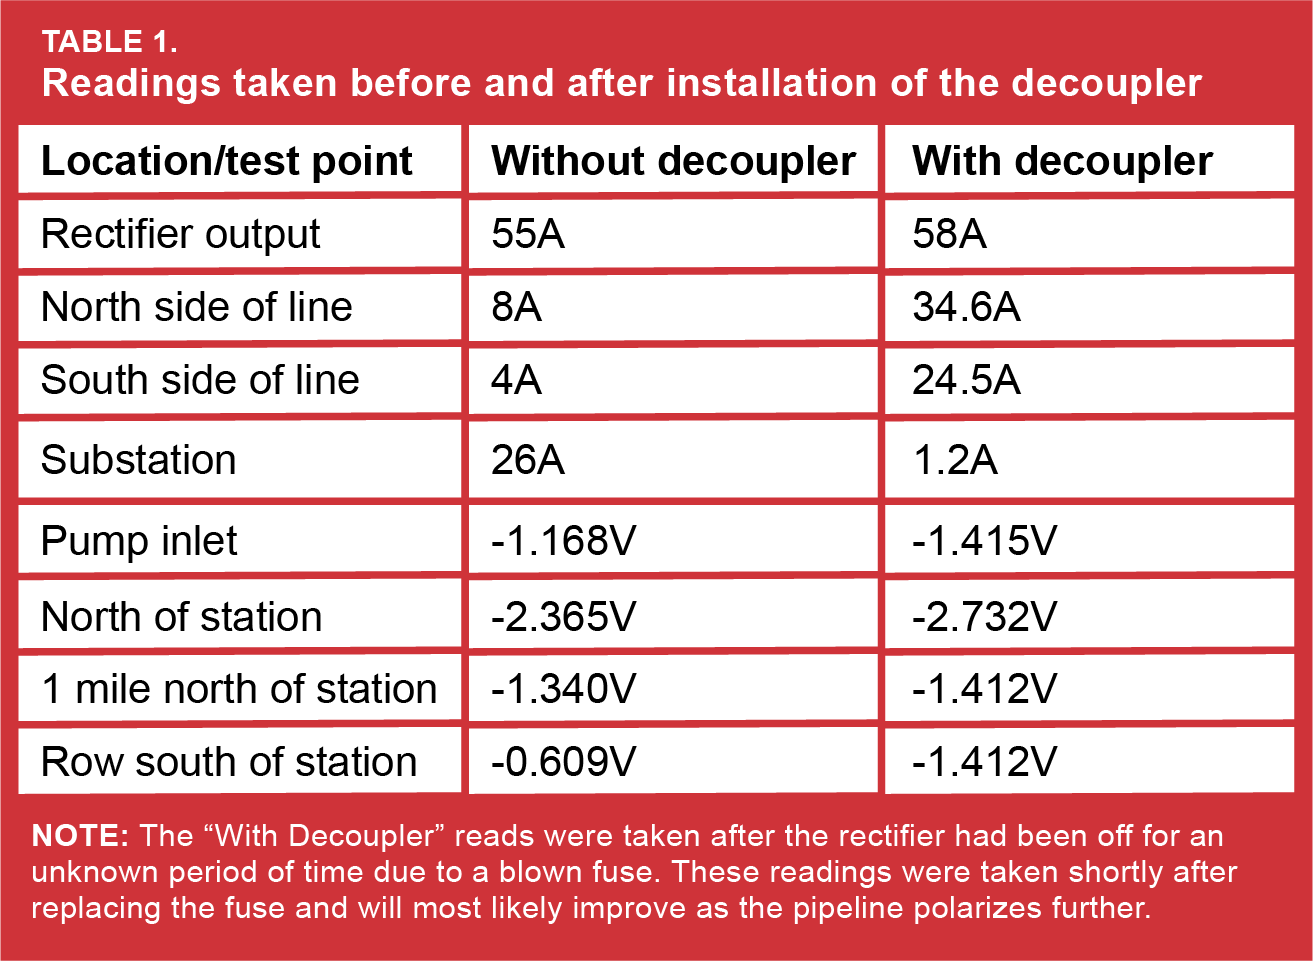 Table 1: Readings taken before and after installation of decoupler